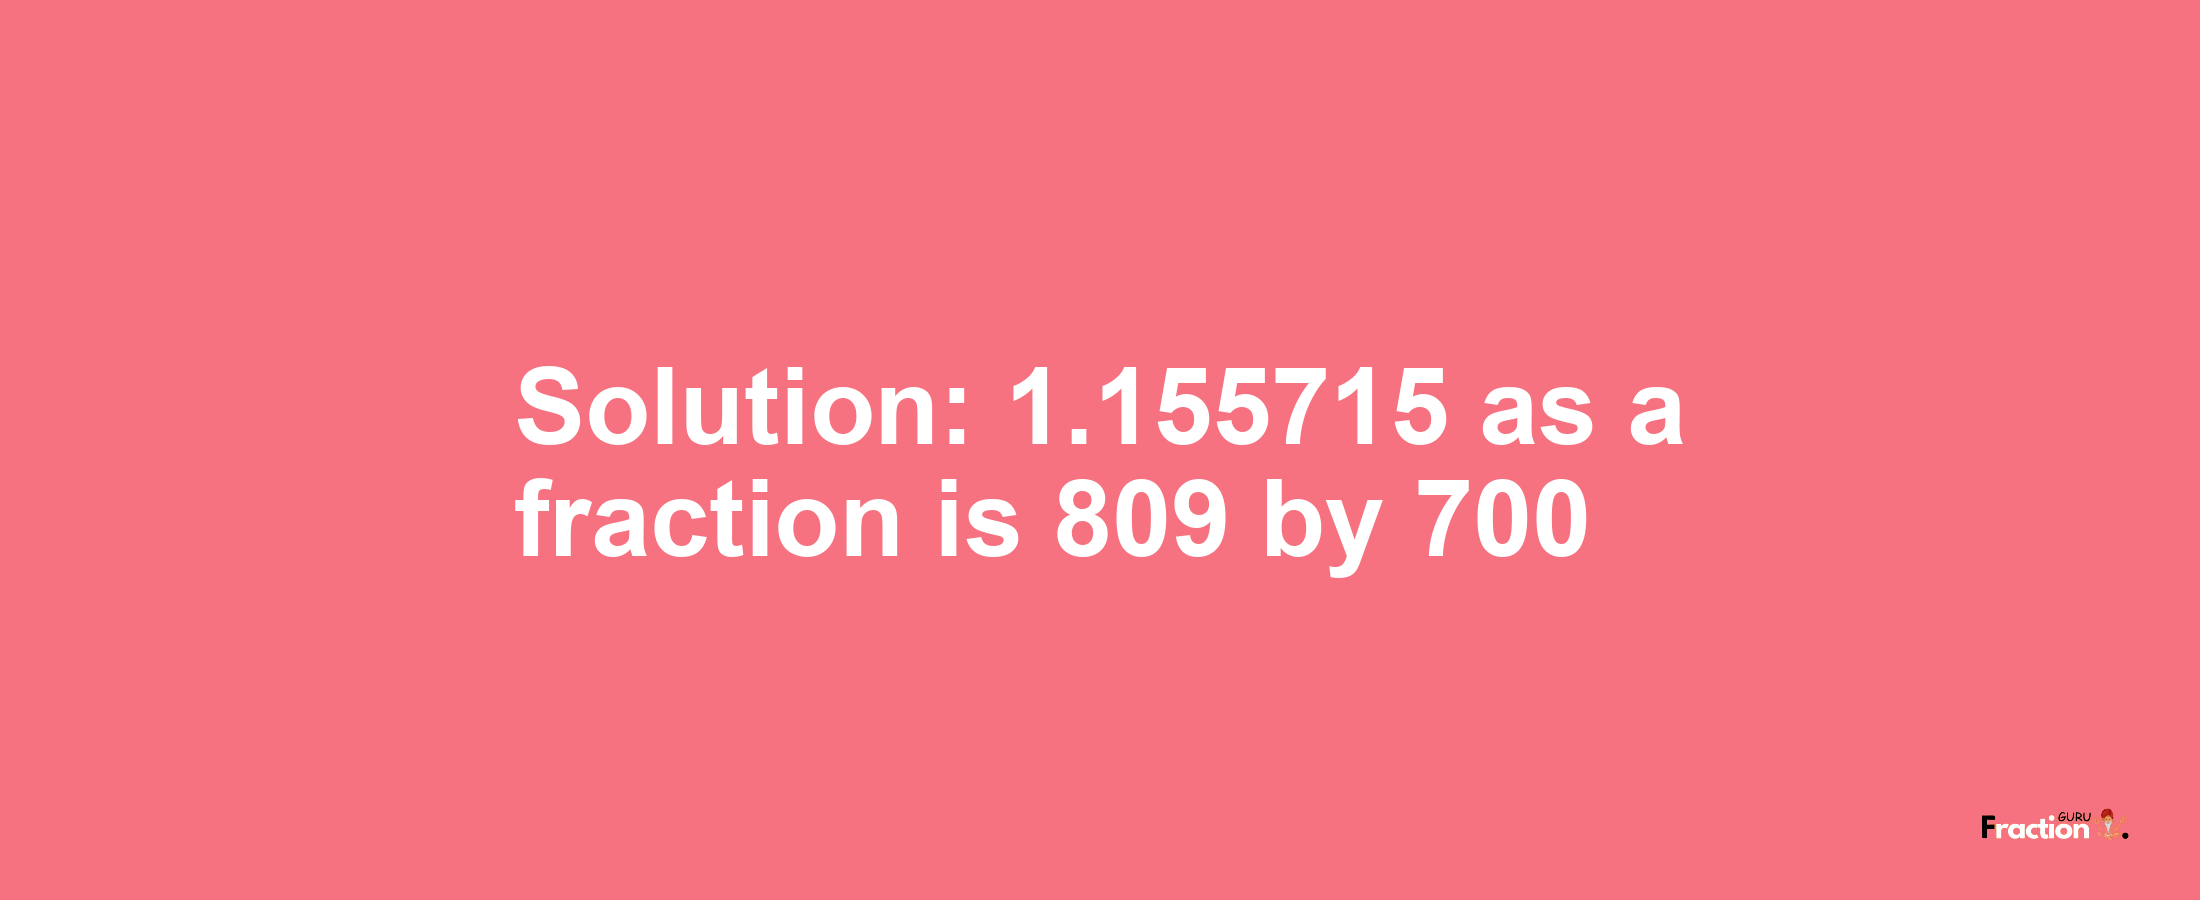 Solution:1.155715 as a fraction is 809/700